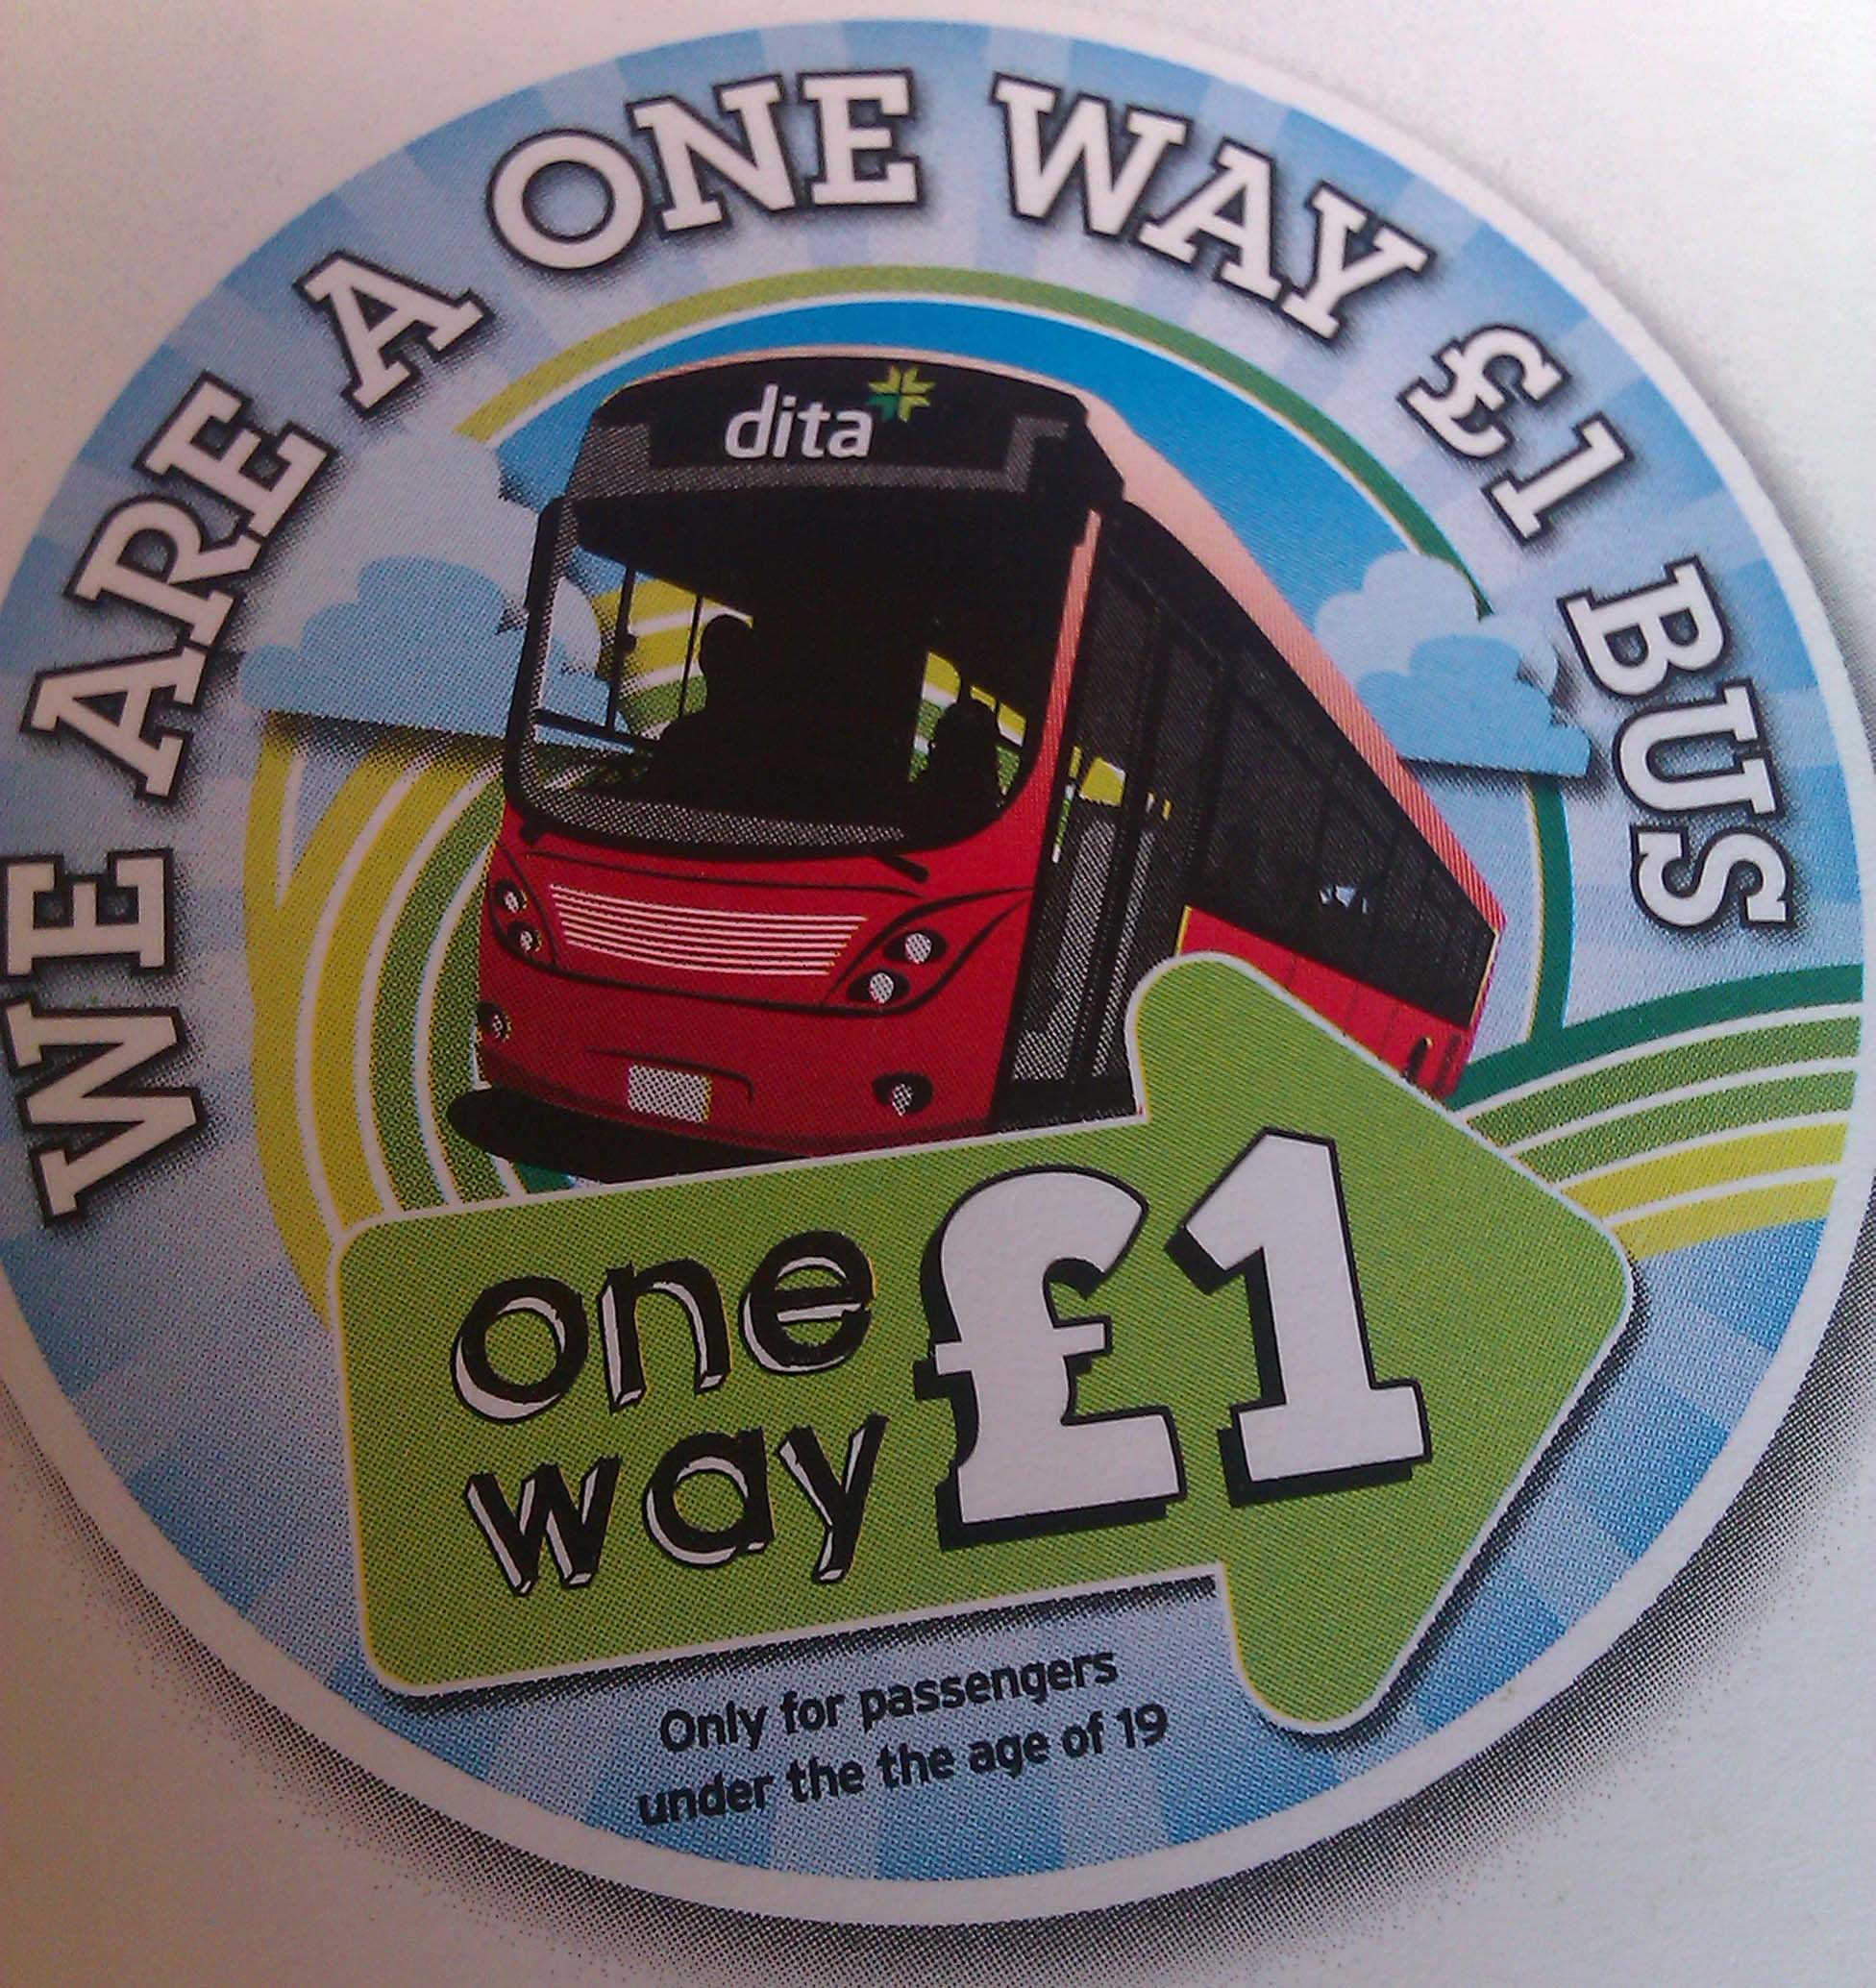 The 'One Way £1' logo